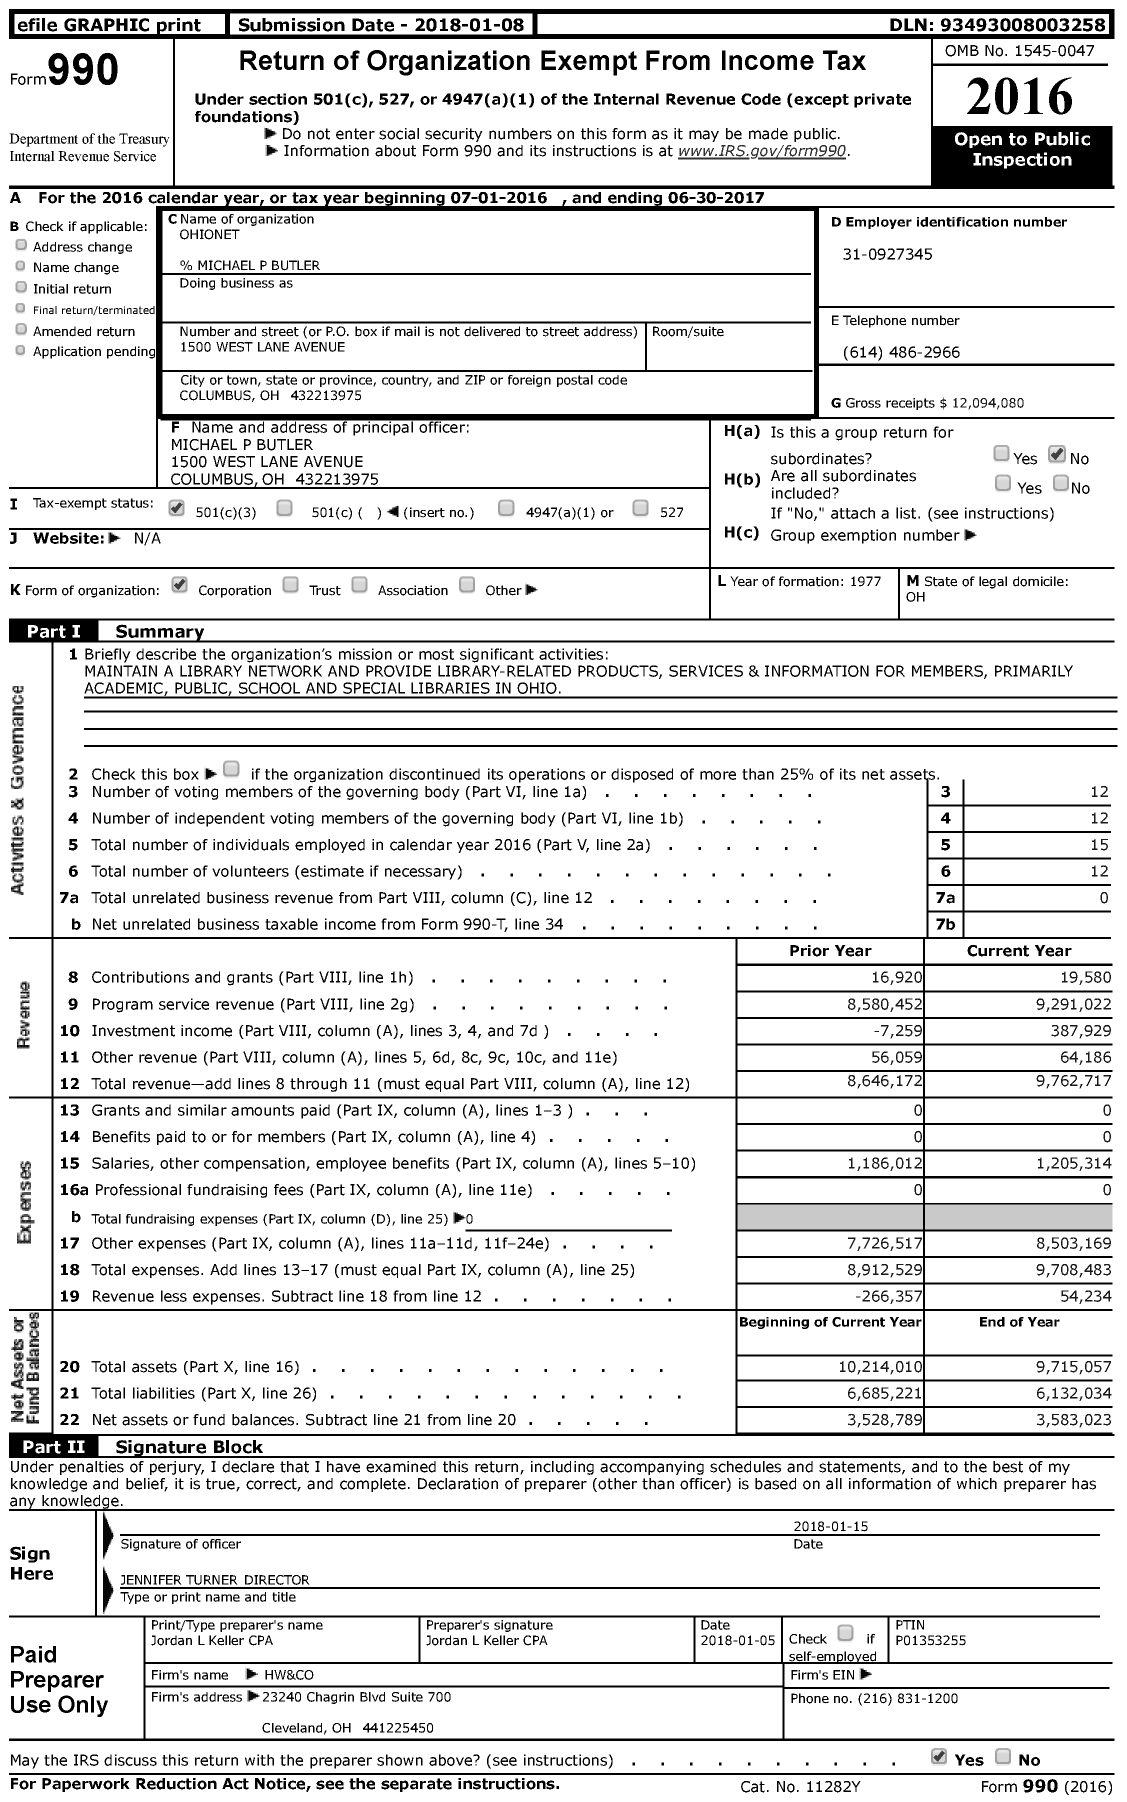 Image of first page of 2016 Form 990 for OhioNet